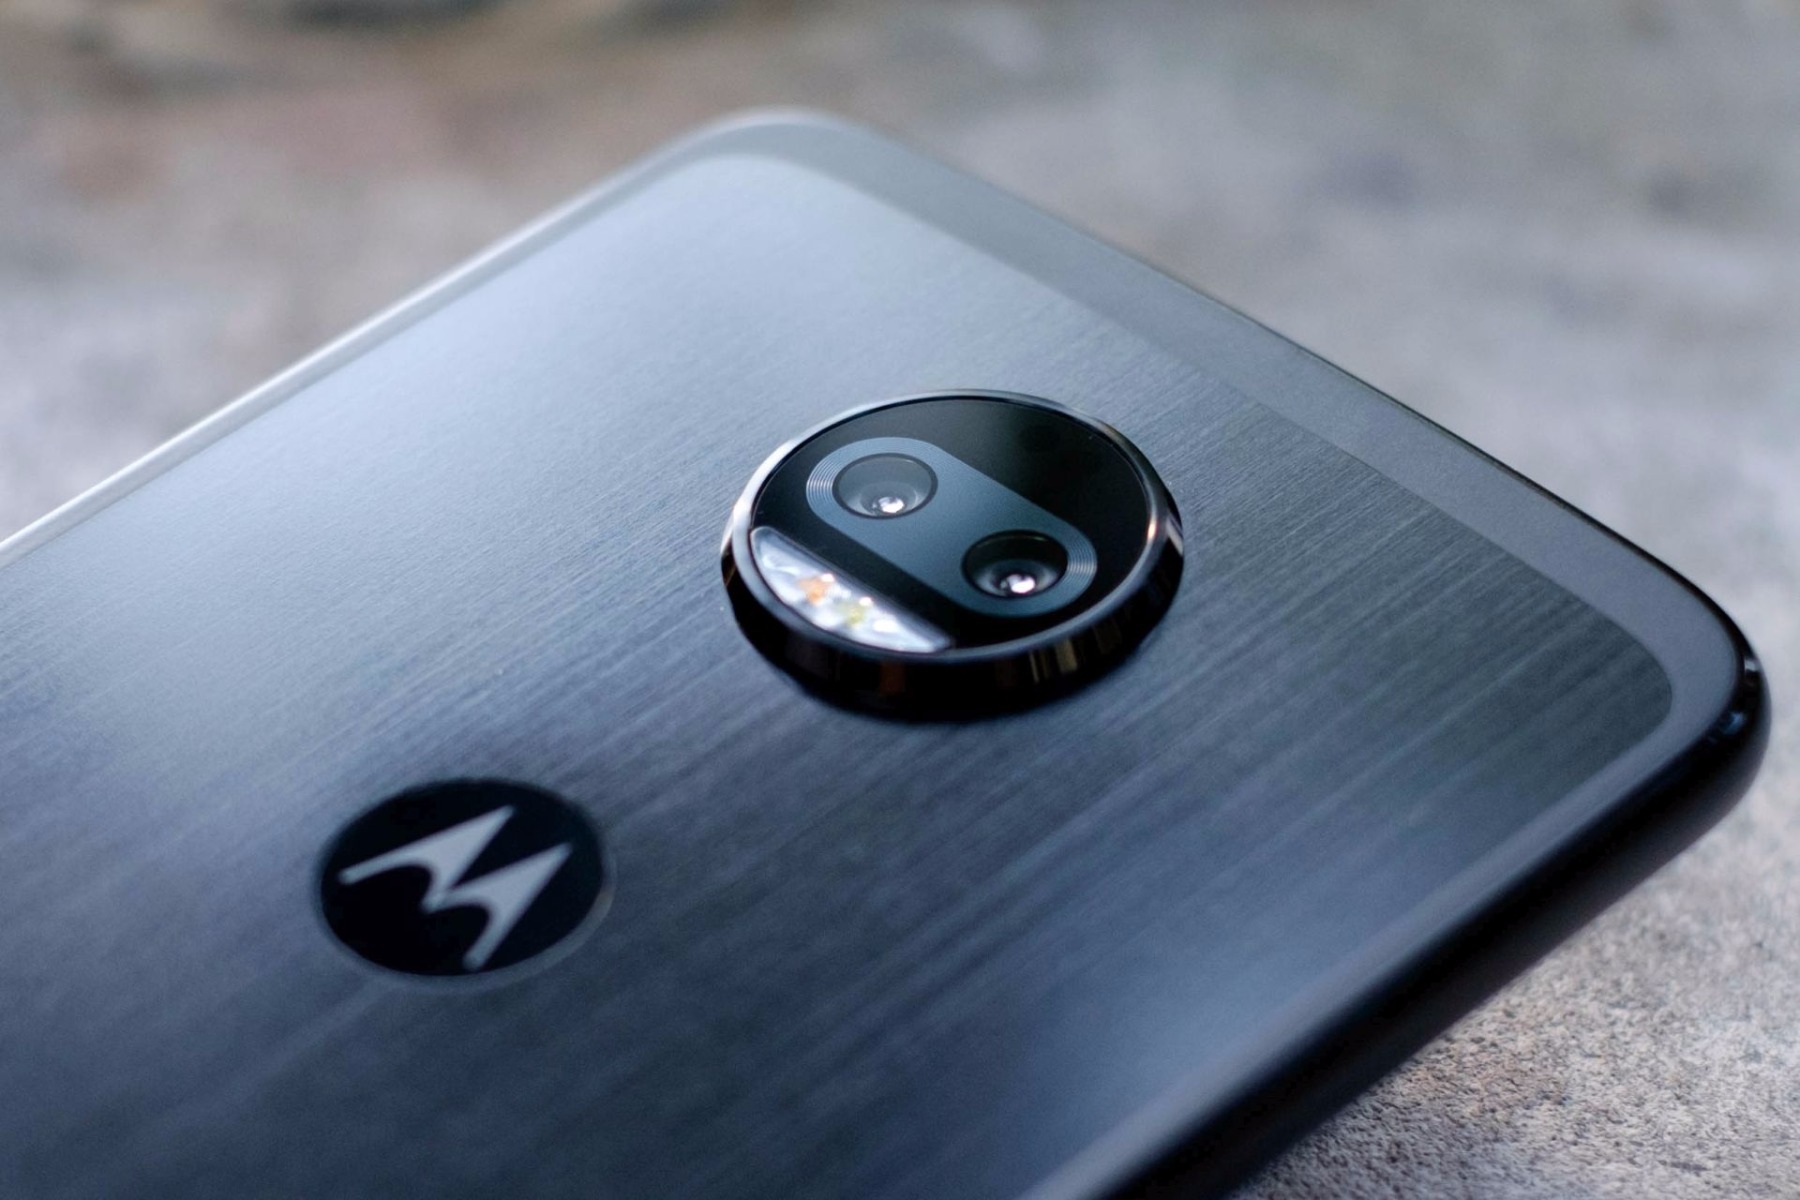 Moto Z2 Force Review: Shatterproof, Modular Android